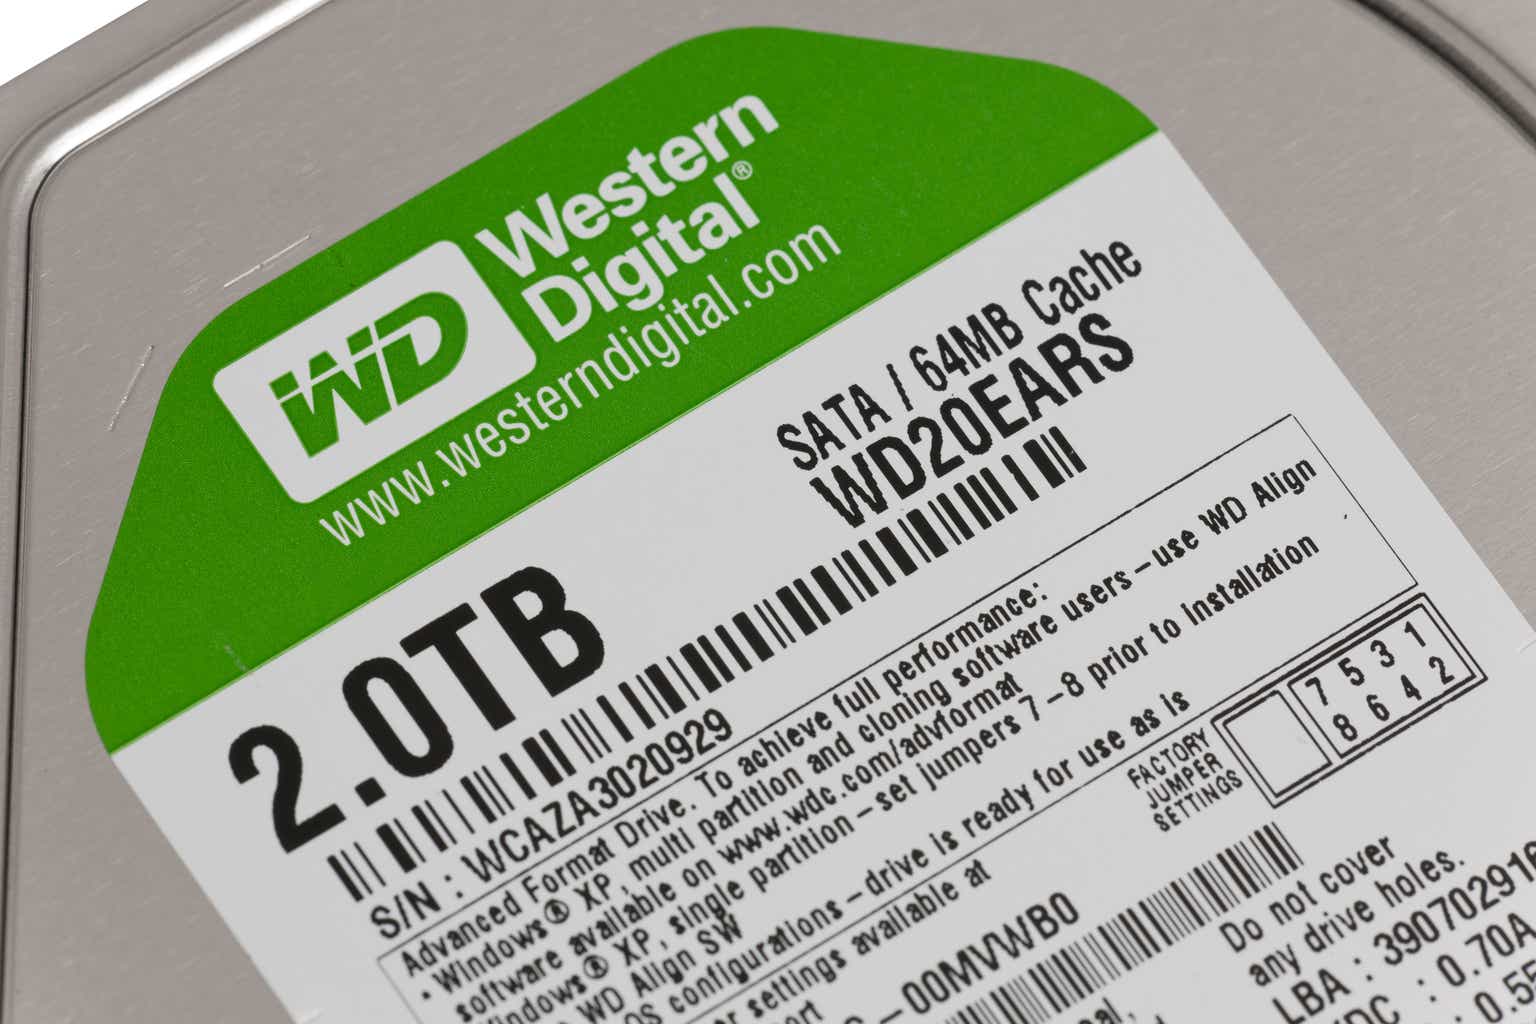 Western Digital is planning to split its SSD memory and hard drive  operations into two new businesses